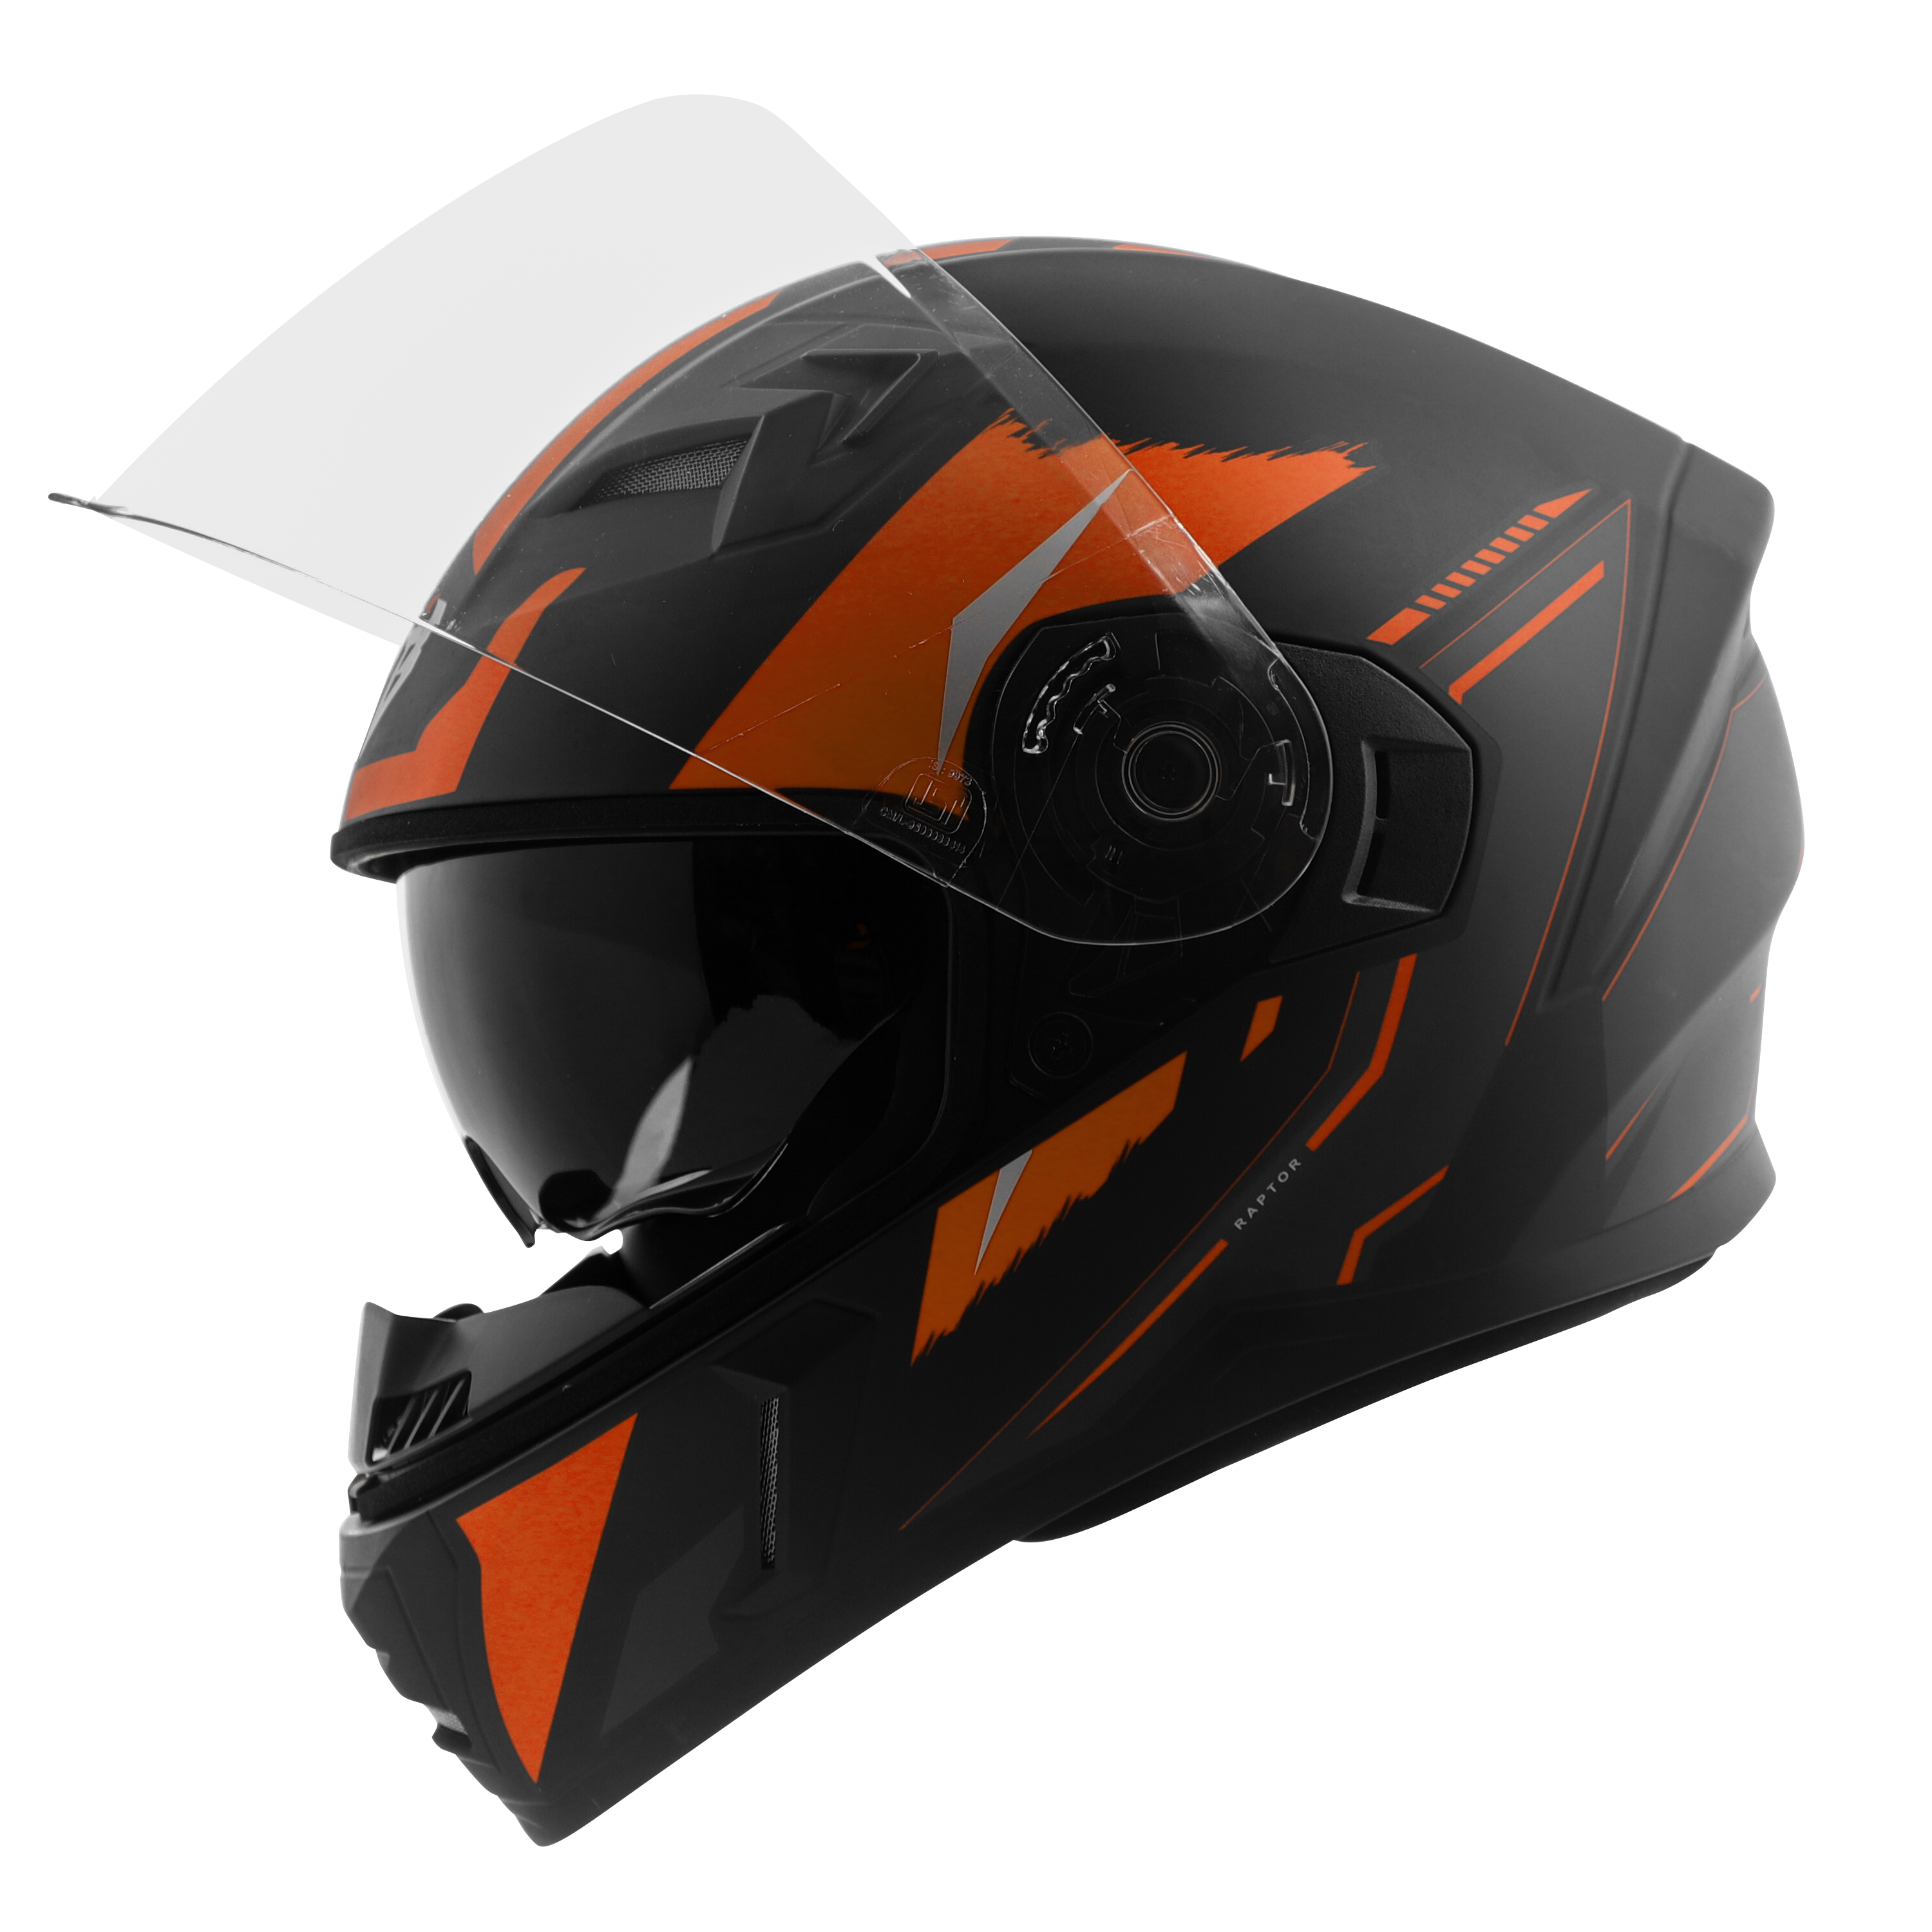 SBA-21 AIR (ISS) GLOSSY BLACK WITH ORANGE WITH HIGH END INTERIOR